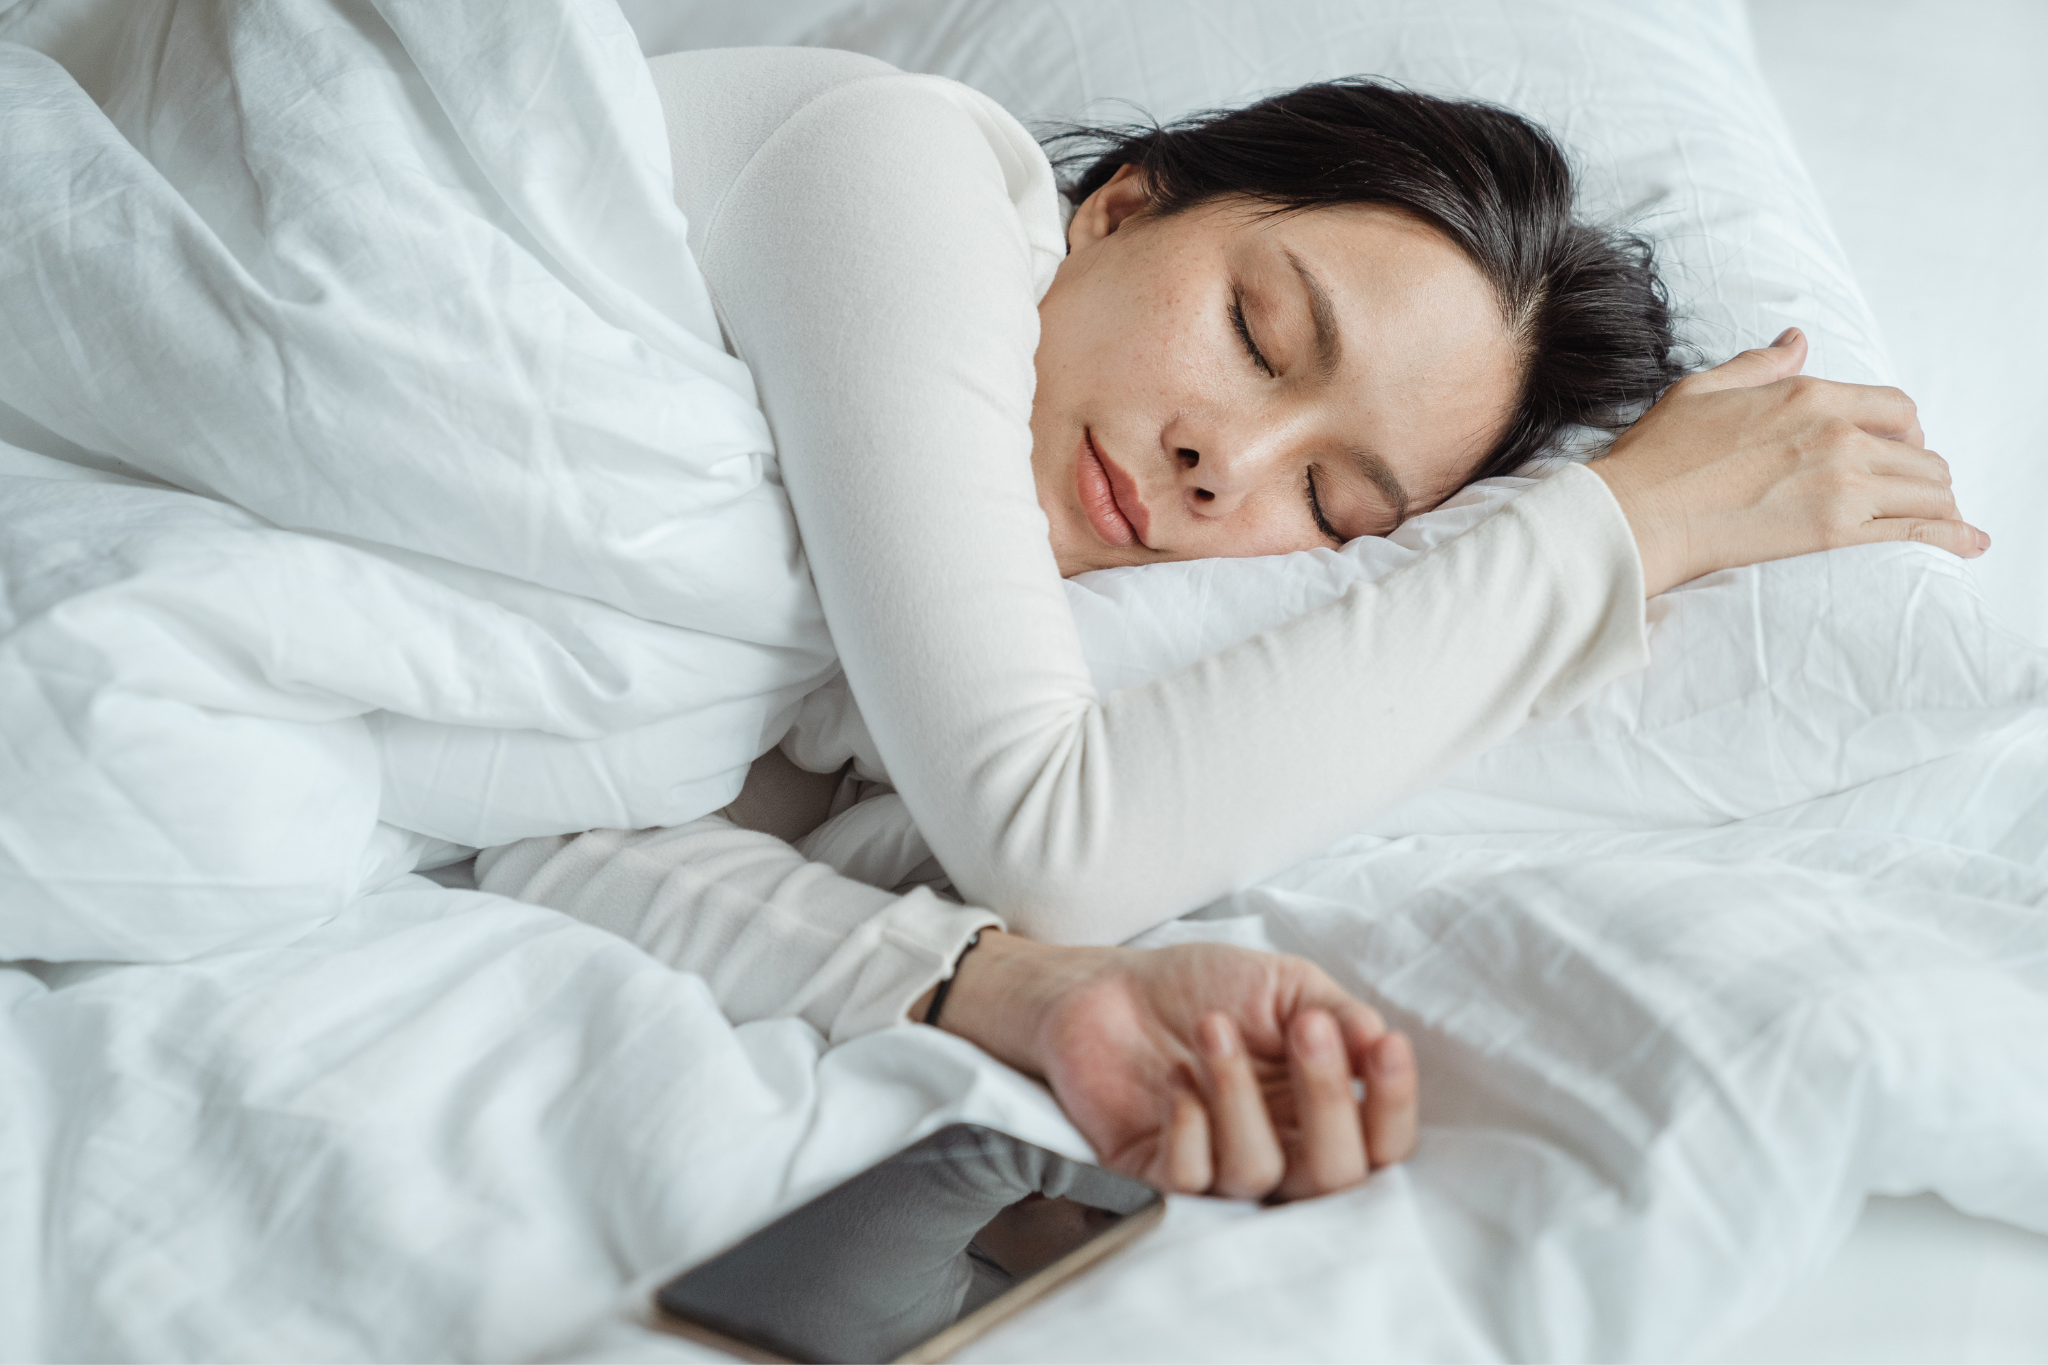 Part 2 of 3: How to choose the right pillow for better sleep - How to choose the right pillow based on your sleeping position and individual needs